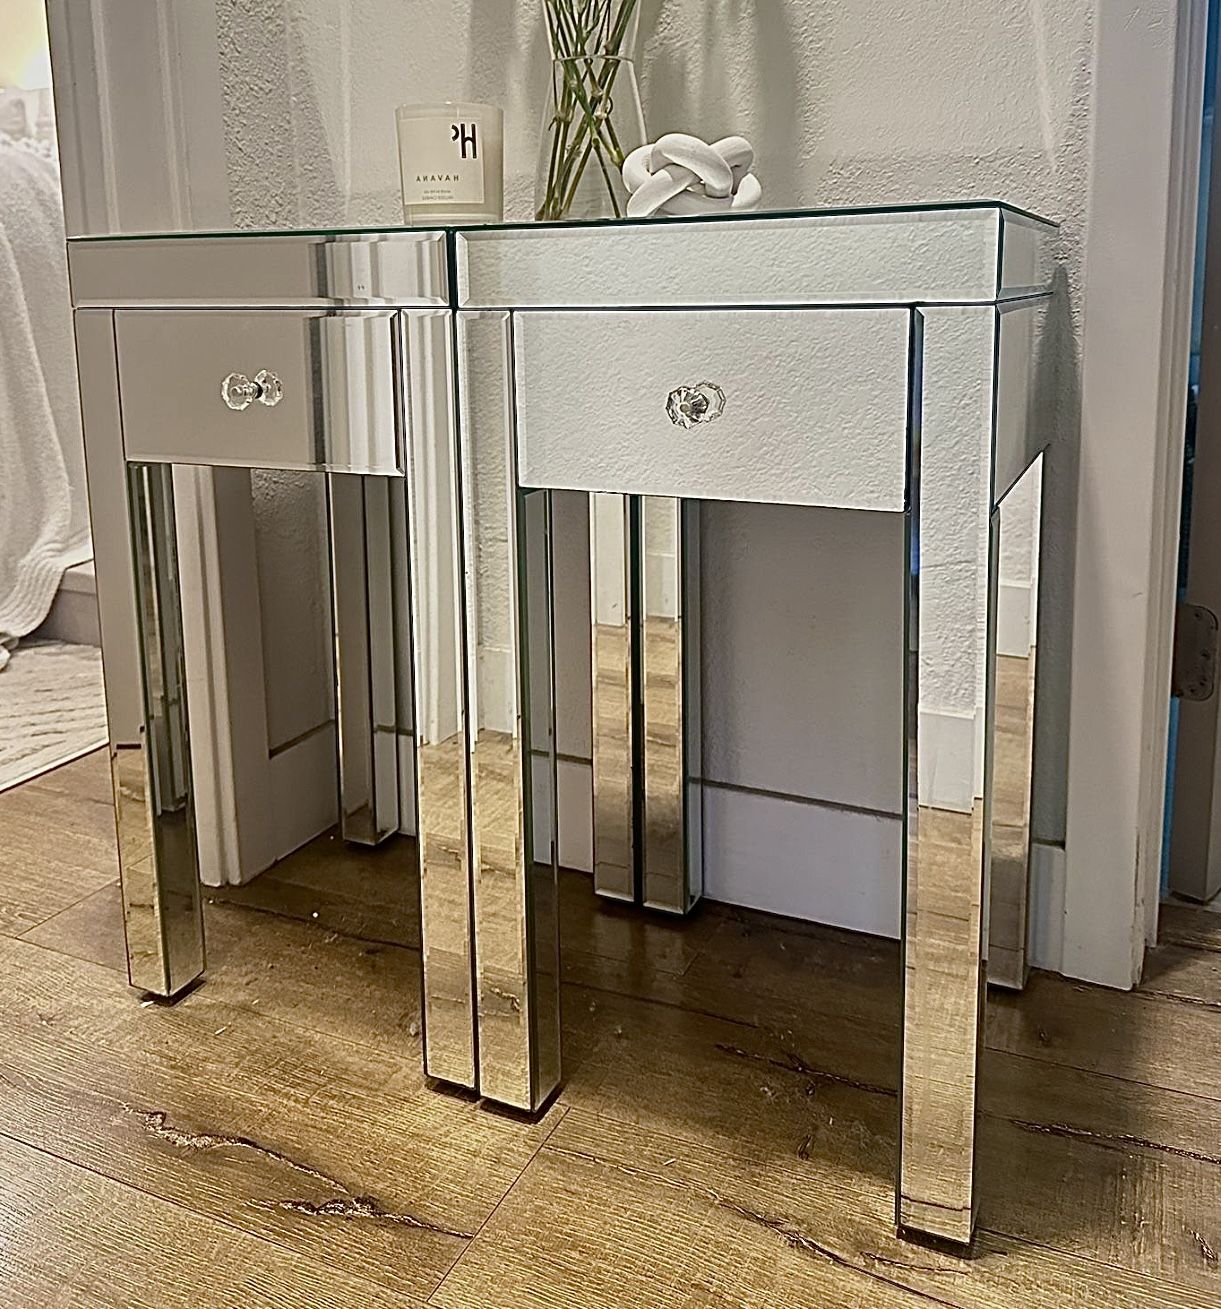 ♥️♥️2 Beautiful Winado Modern Mirrored Nightstands End Table,, Bedside Storage Cabinet With Drawer♥️♥️